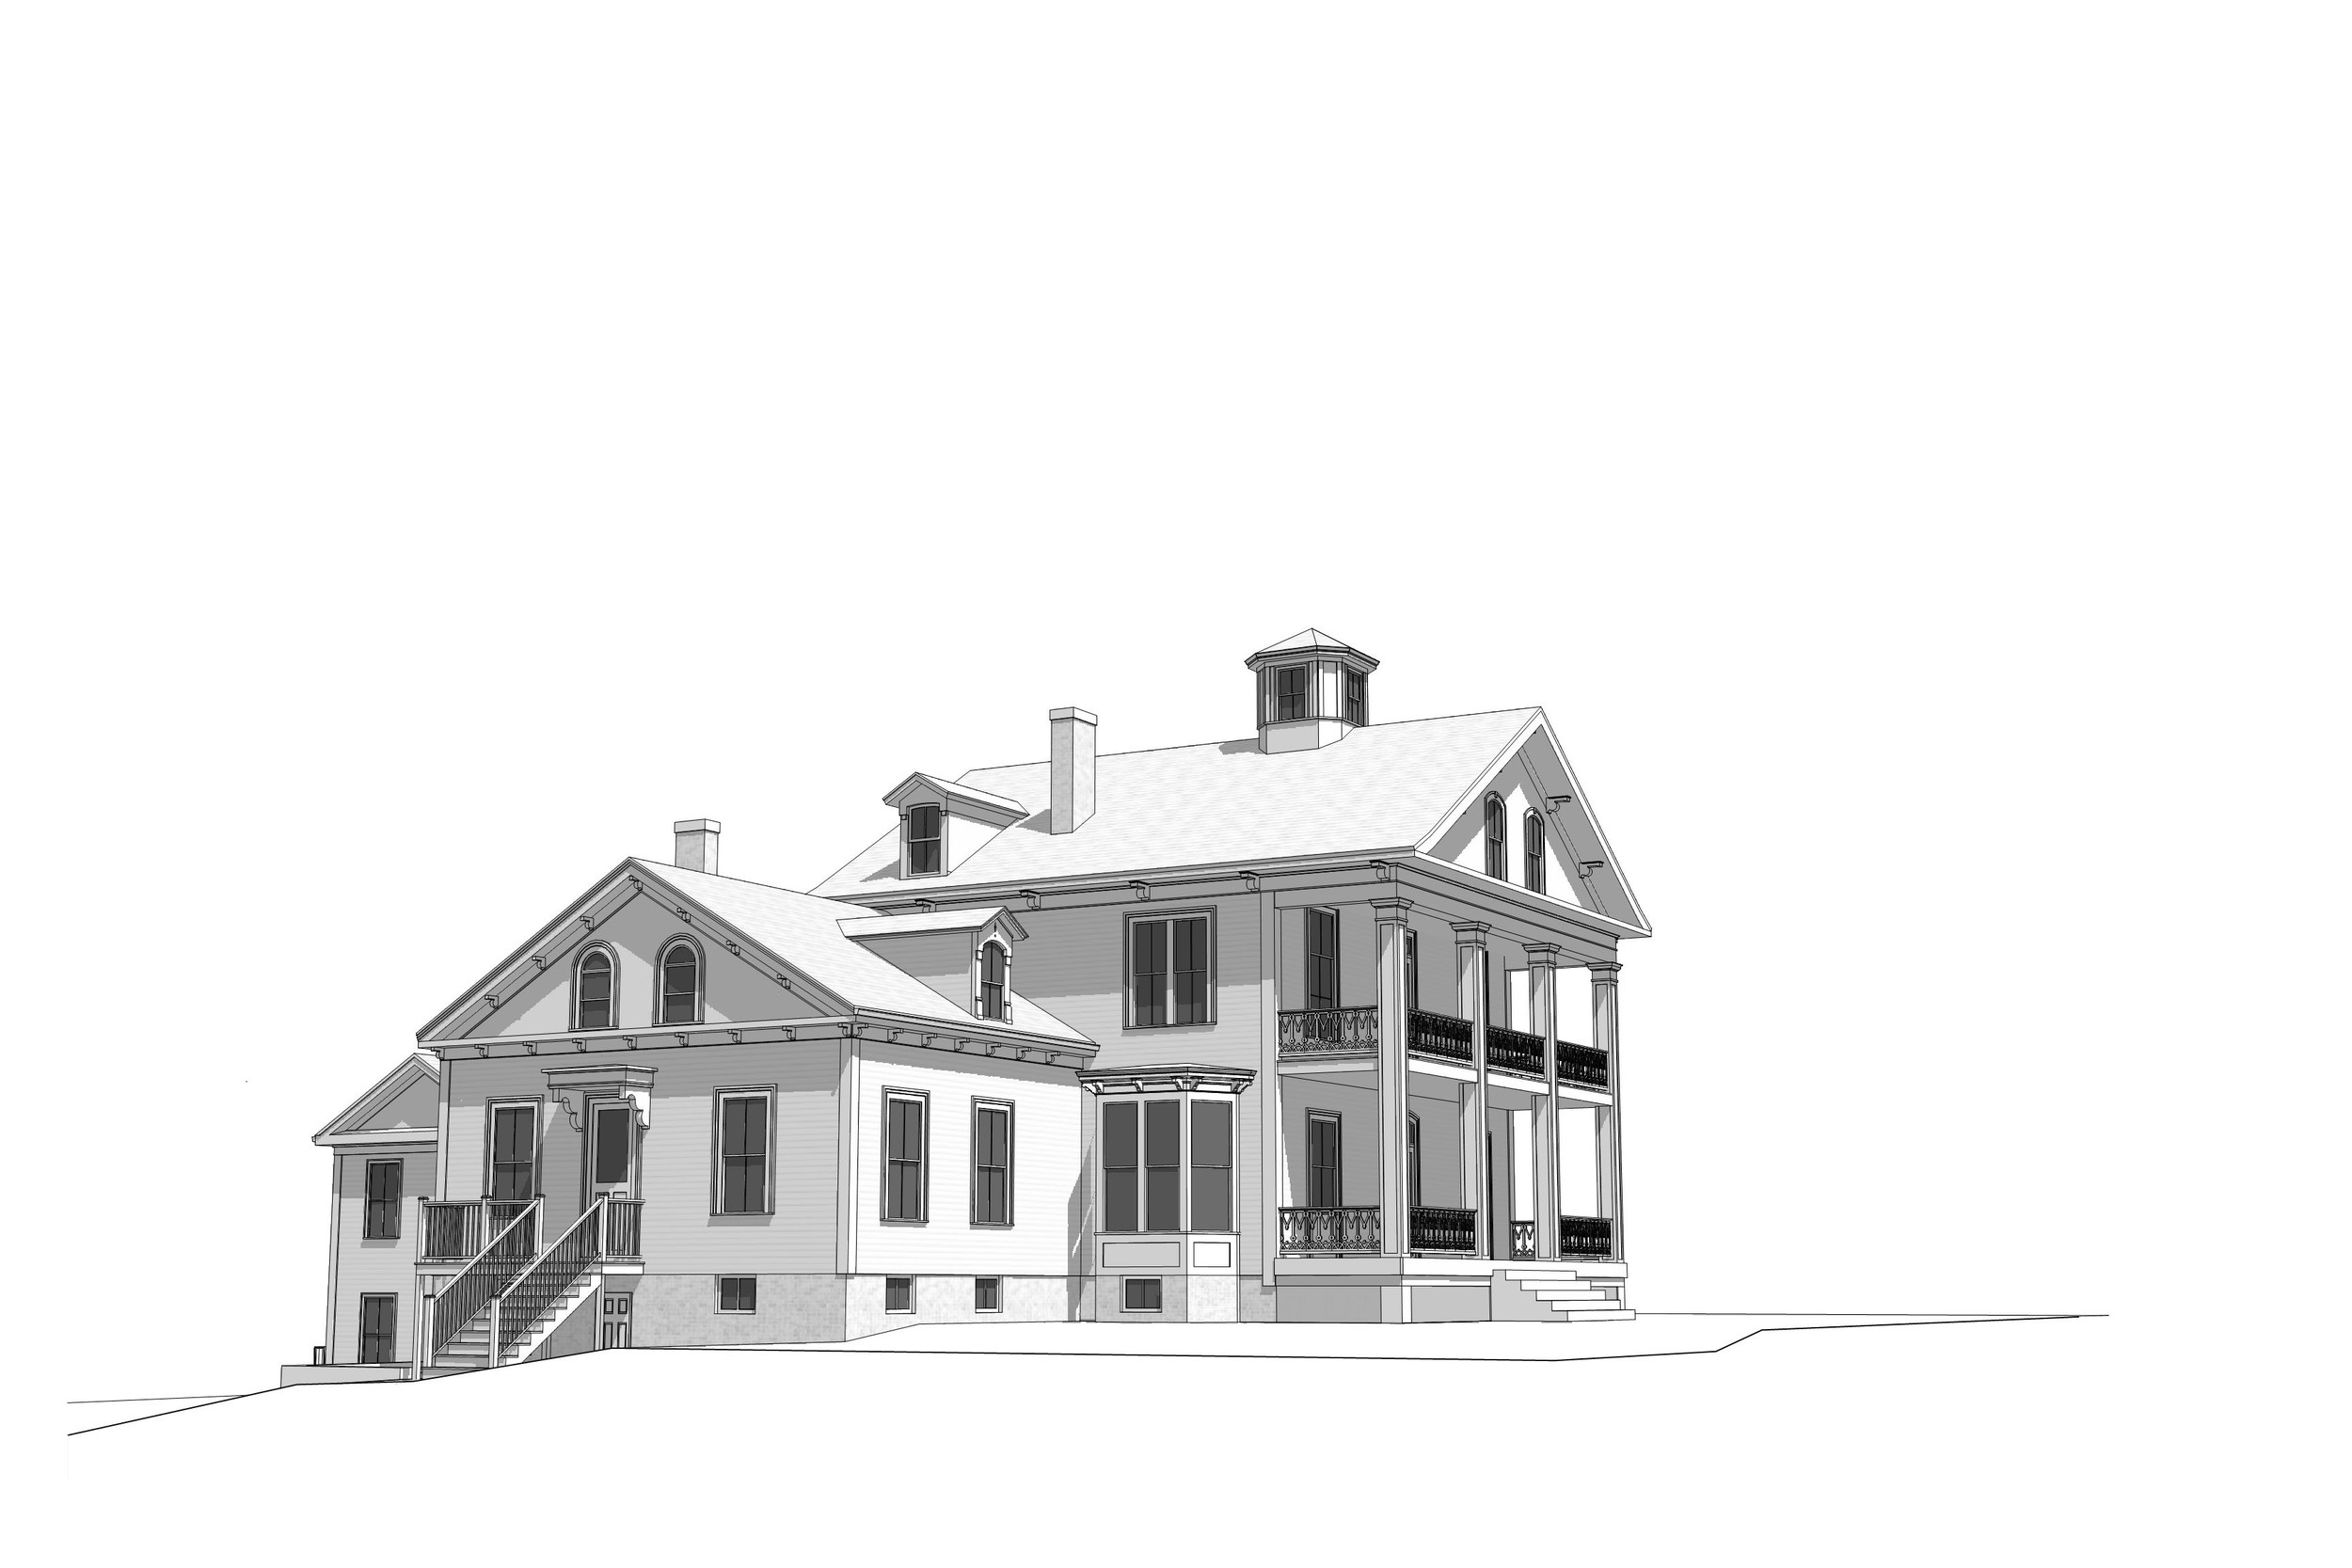 STANDING TALL: An architect’s rendering of the house has it standing straight and tall as it once did. The House of Hope is considering having the rendering made into a sign so area residents can see what’s planned.